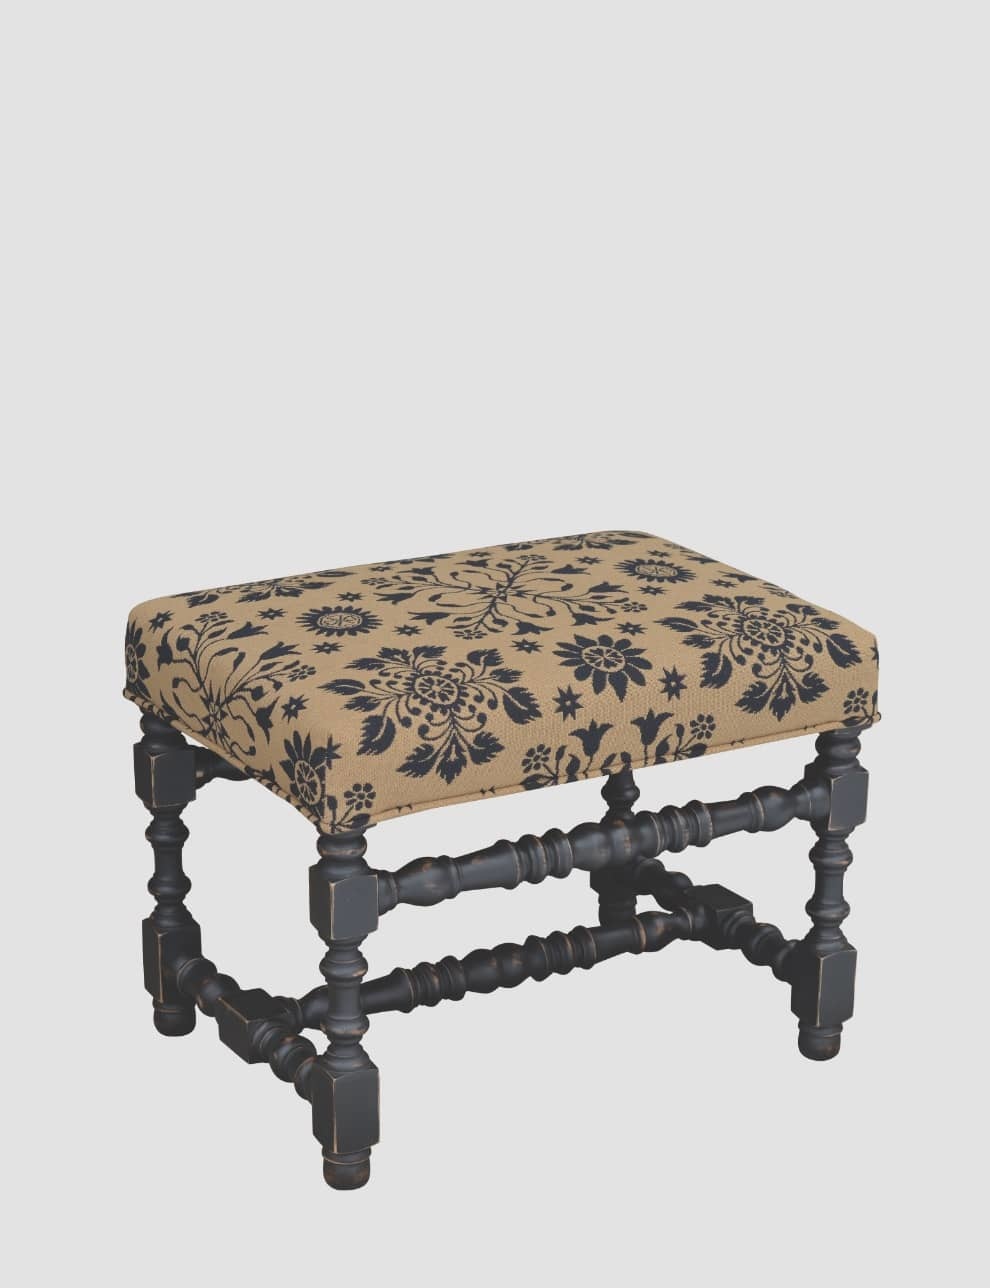 Town & Country Furnishings Jacobean Bench - 22" Brand: Town & Country Furnishings